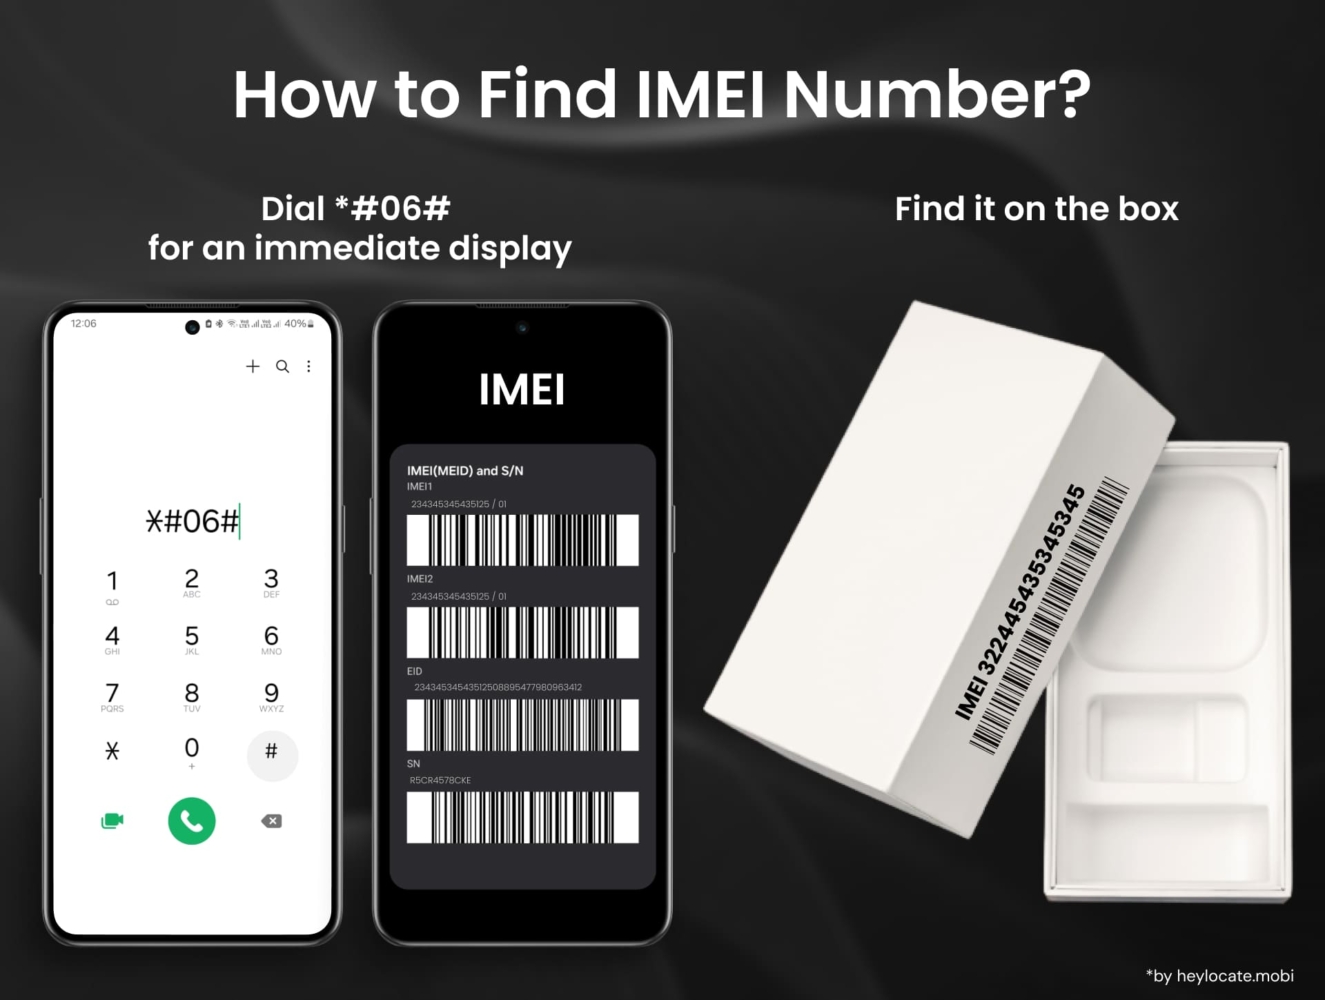 Two methods to find the IMEI number of a mobile phone. The left side displays a smartphone with the dial pad open, highlighting the code *#06# to retrieve the IMEI number directly on the screen. The right side shows a mobile phone box with an IMEI number printed on the side